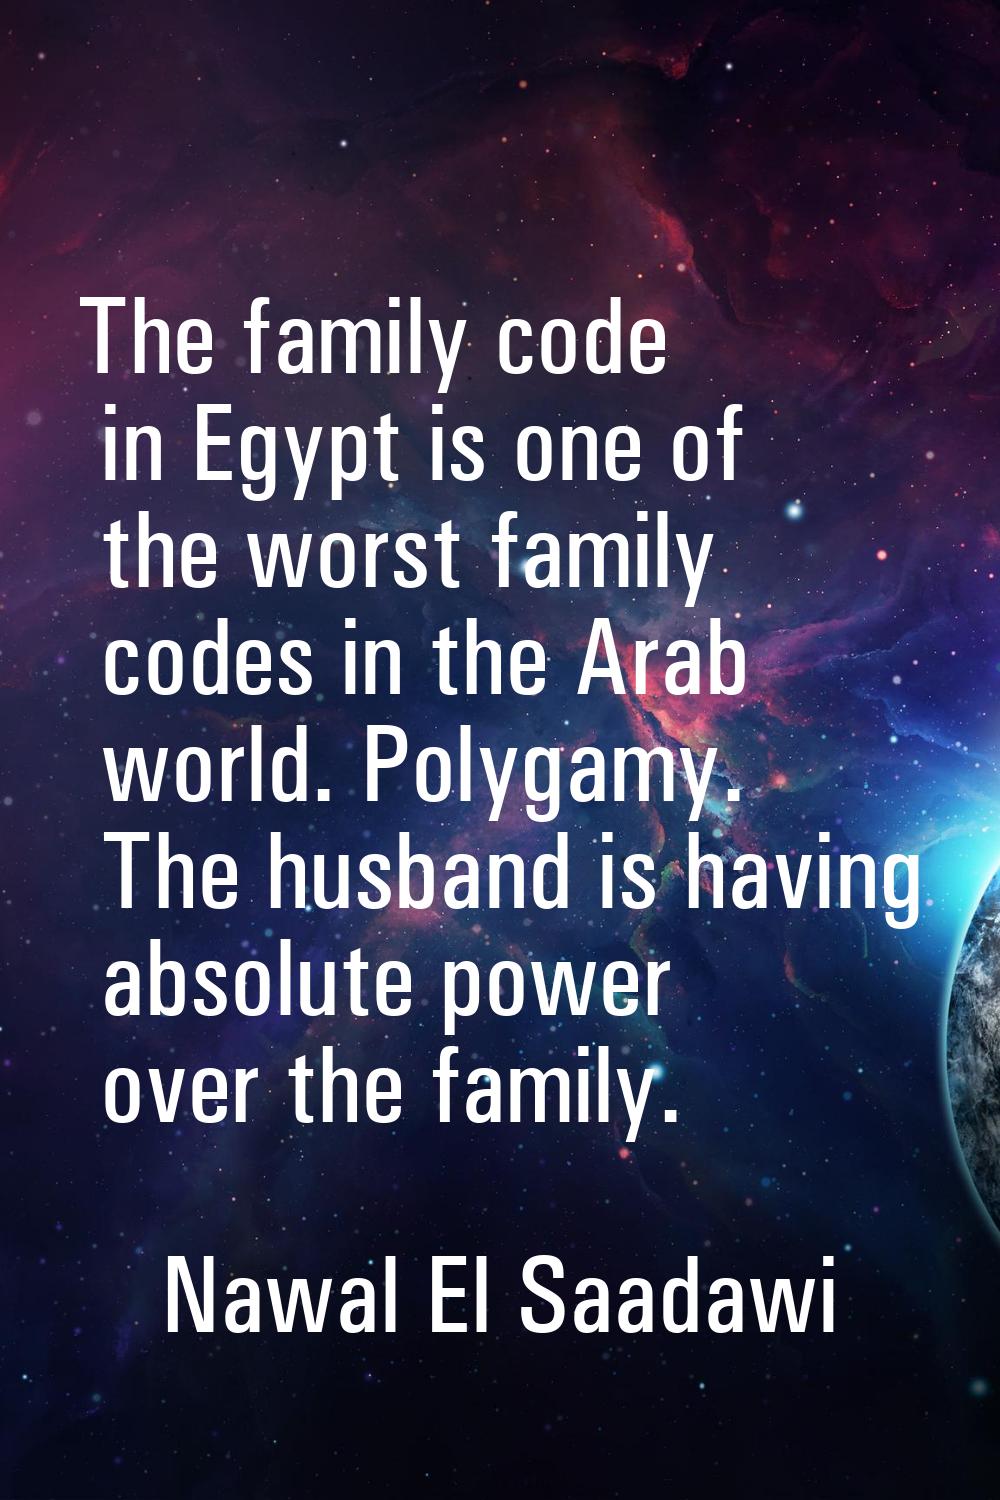 The family code in Egypt is one of the worst family codes in the Arab world. Polygamy. The husband 